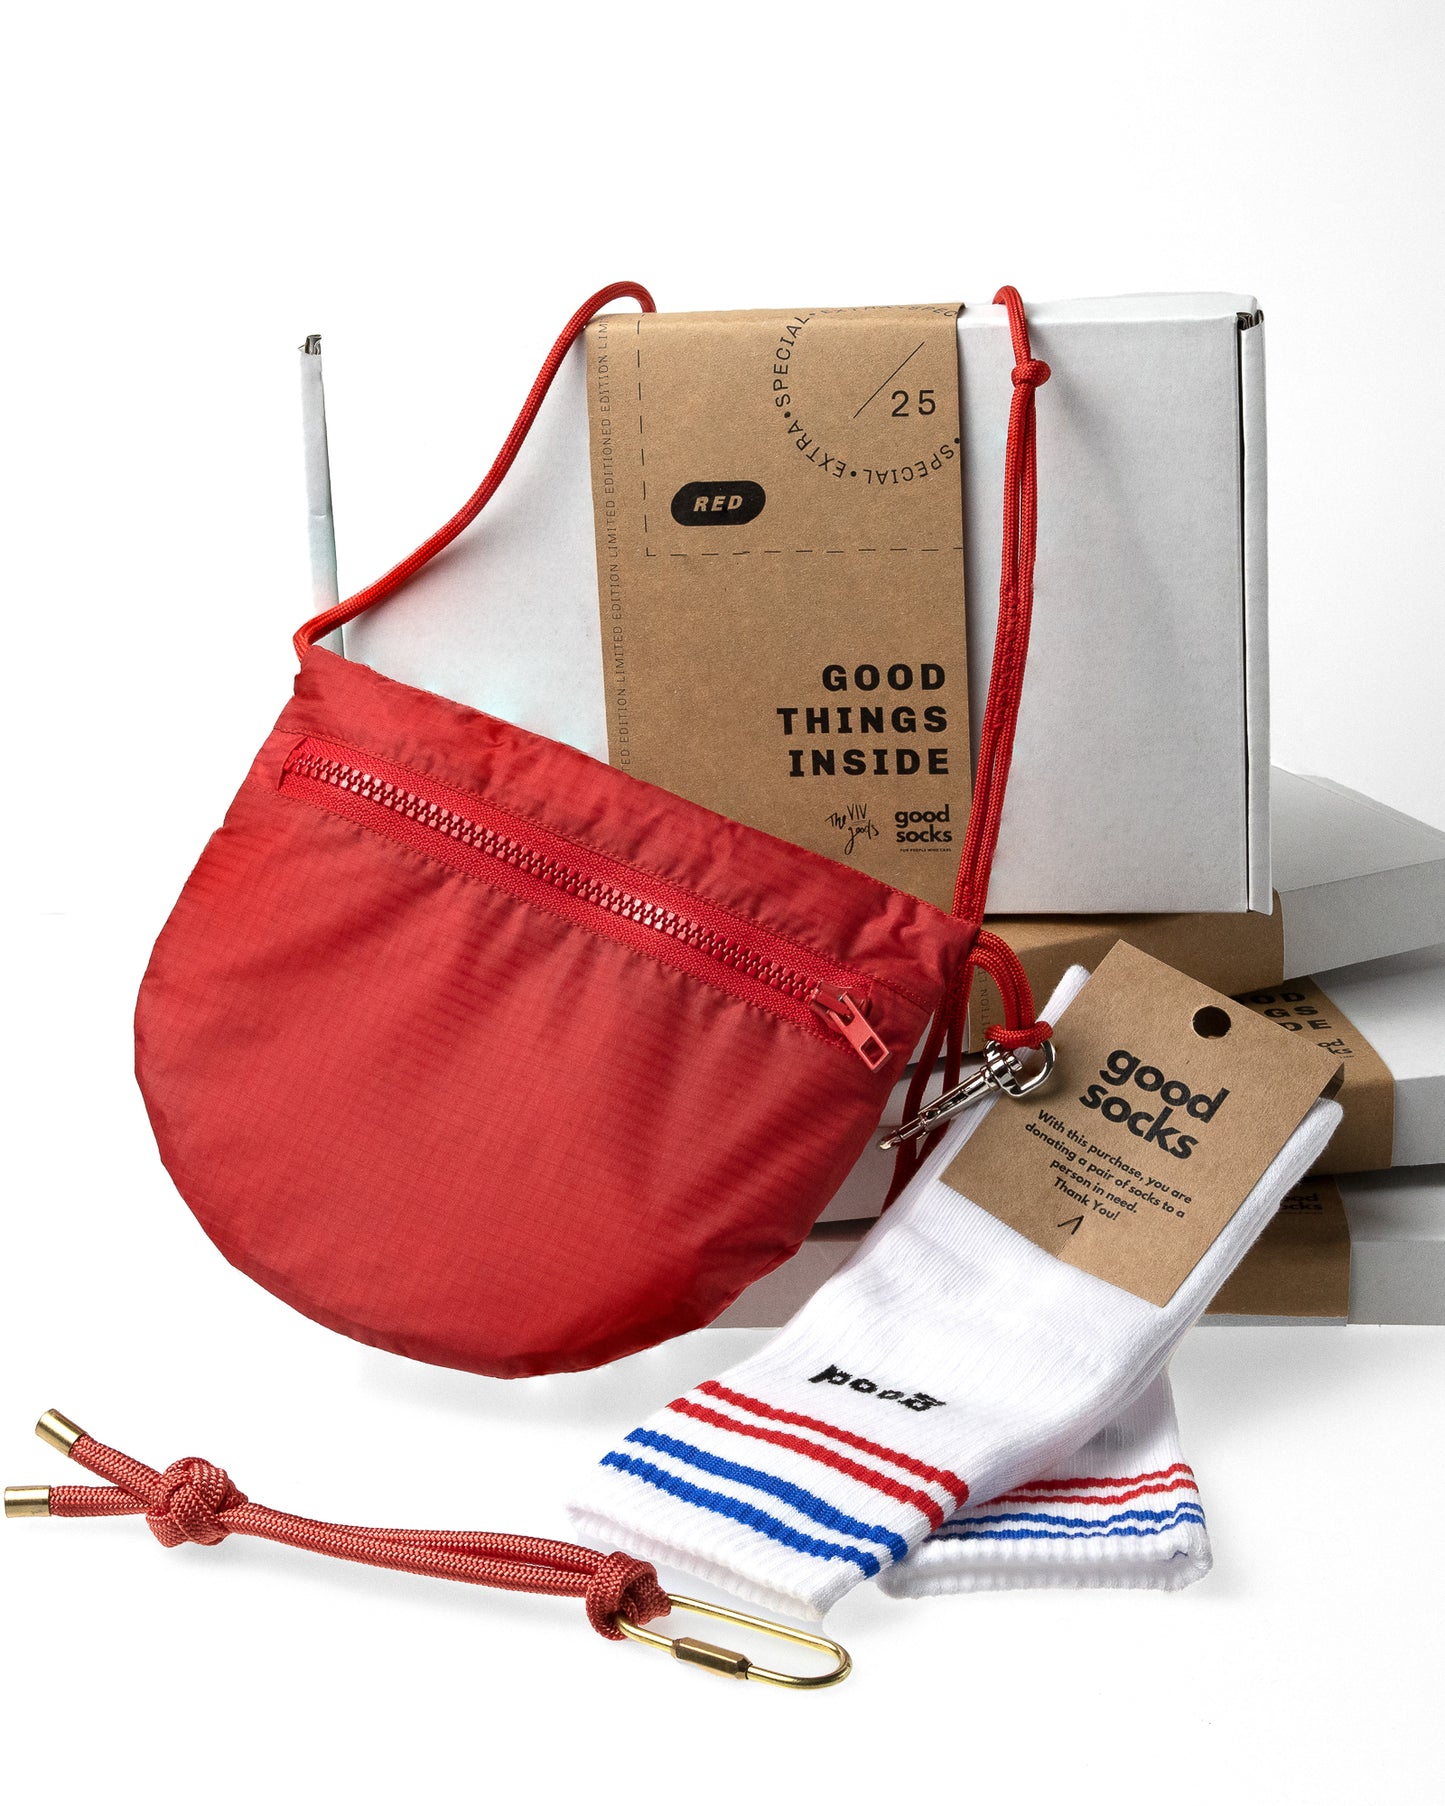 solid red U.BAG with good socks brand socks and red rope keychain